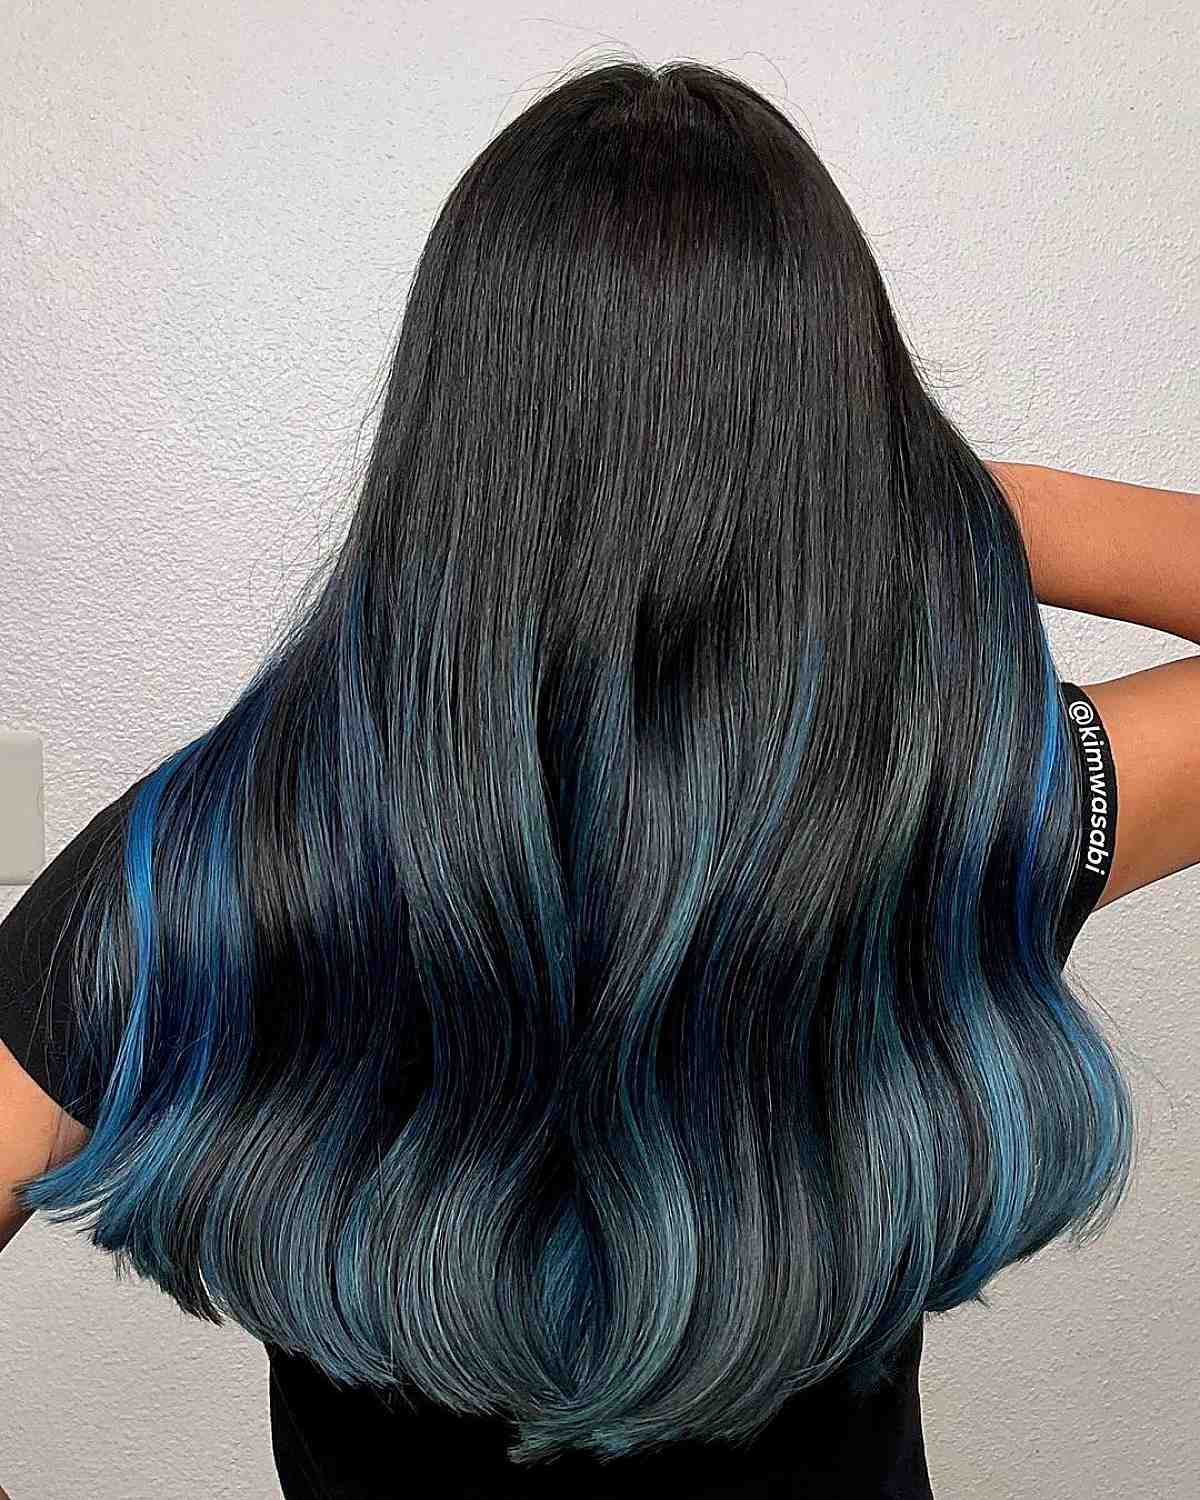 long, thick black hair with blue highlights